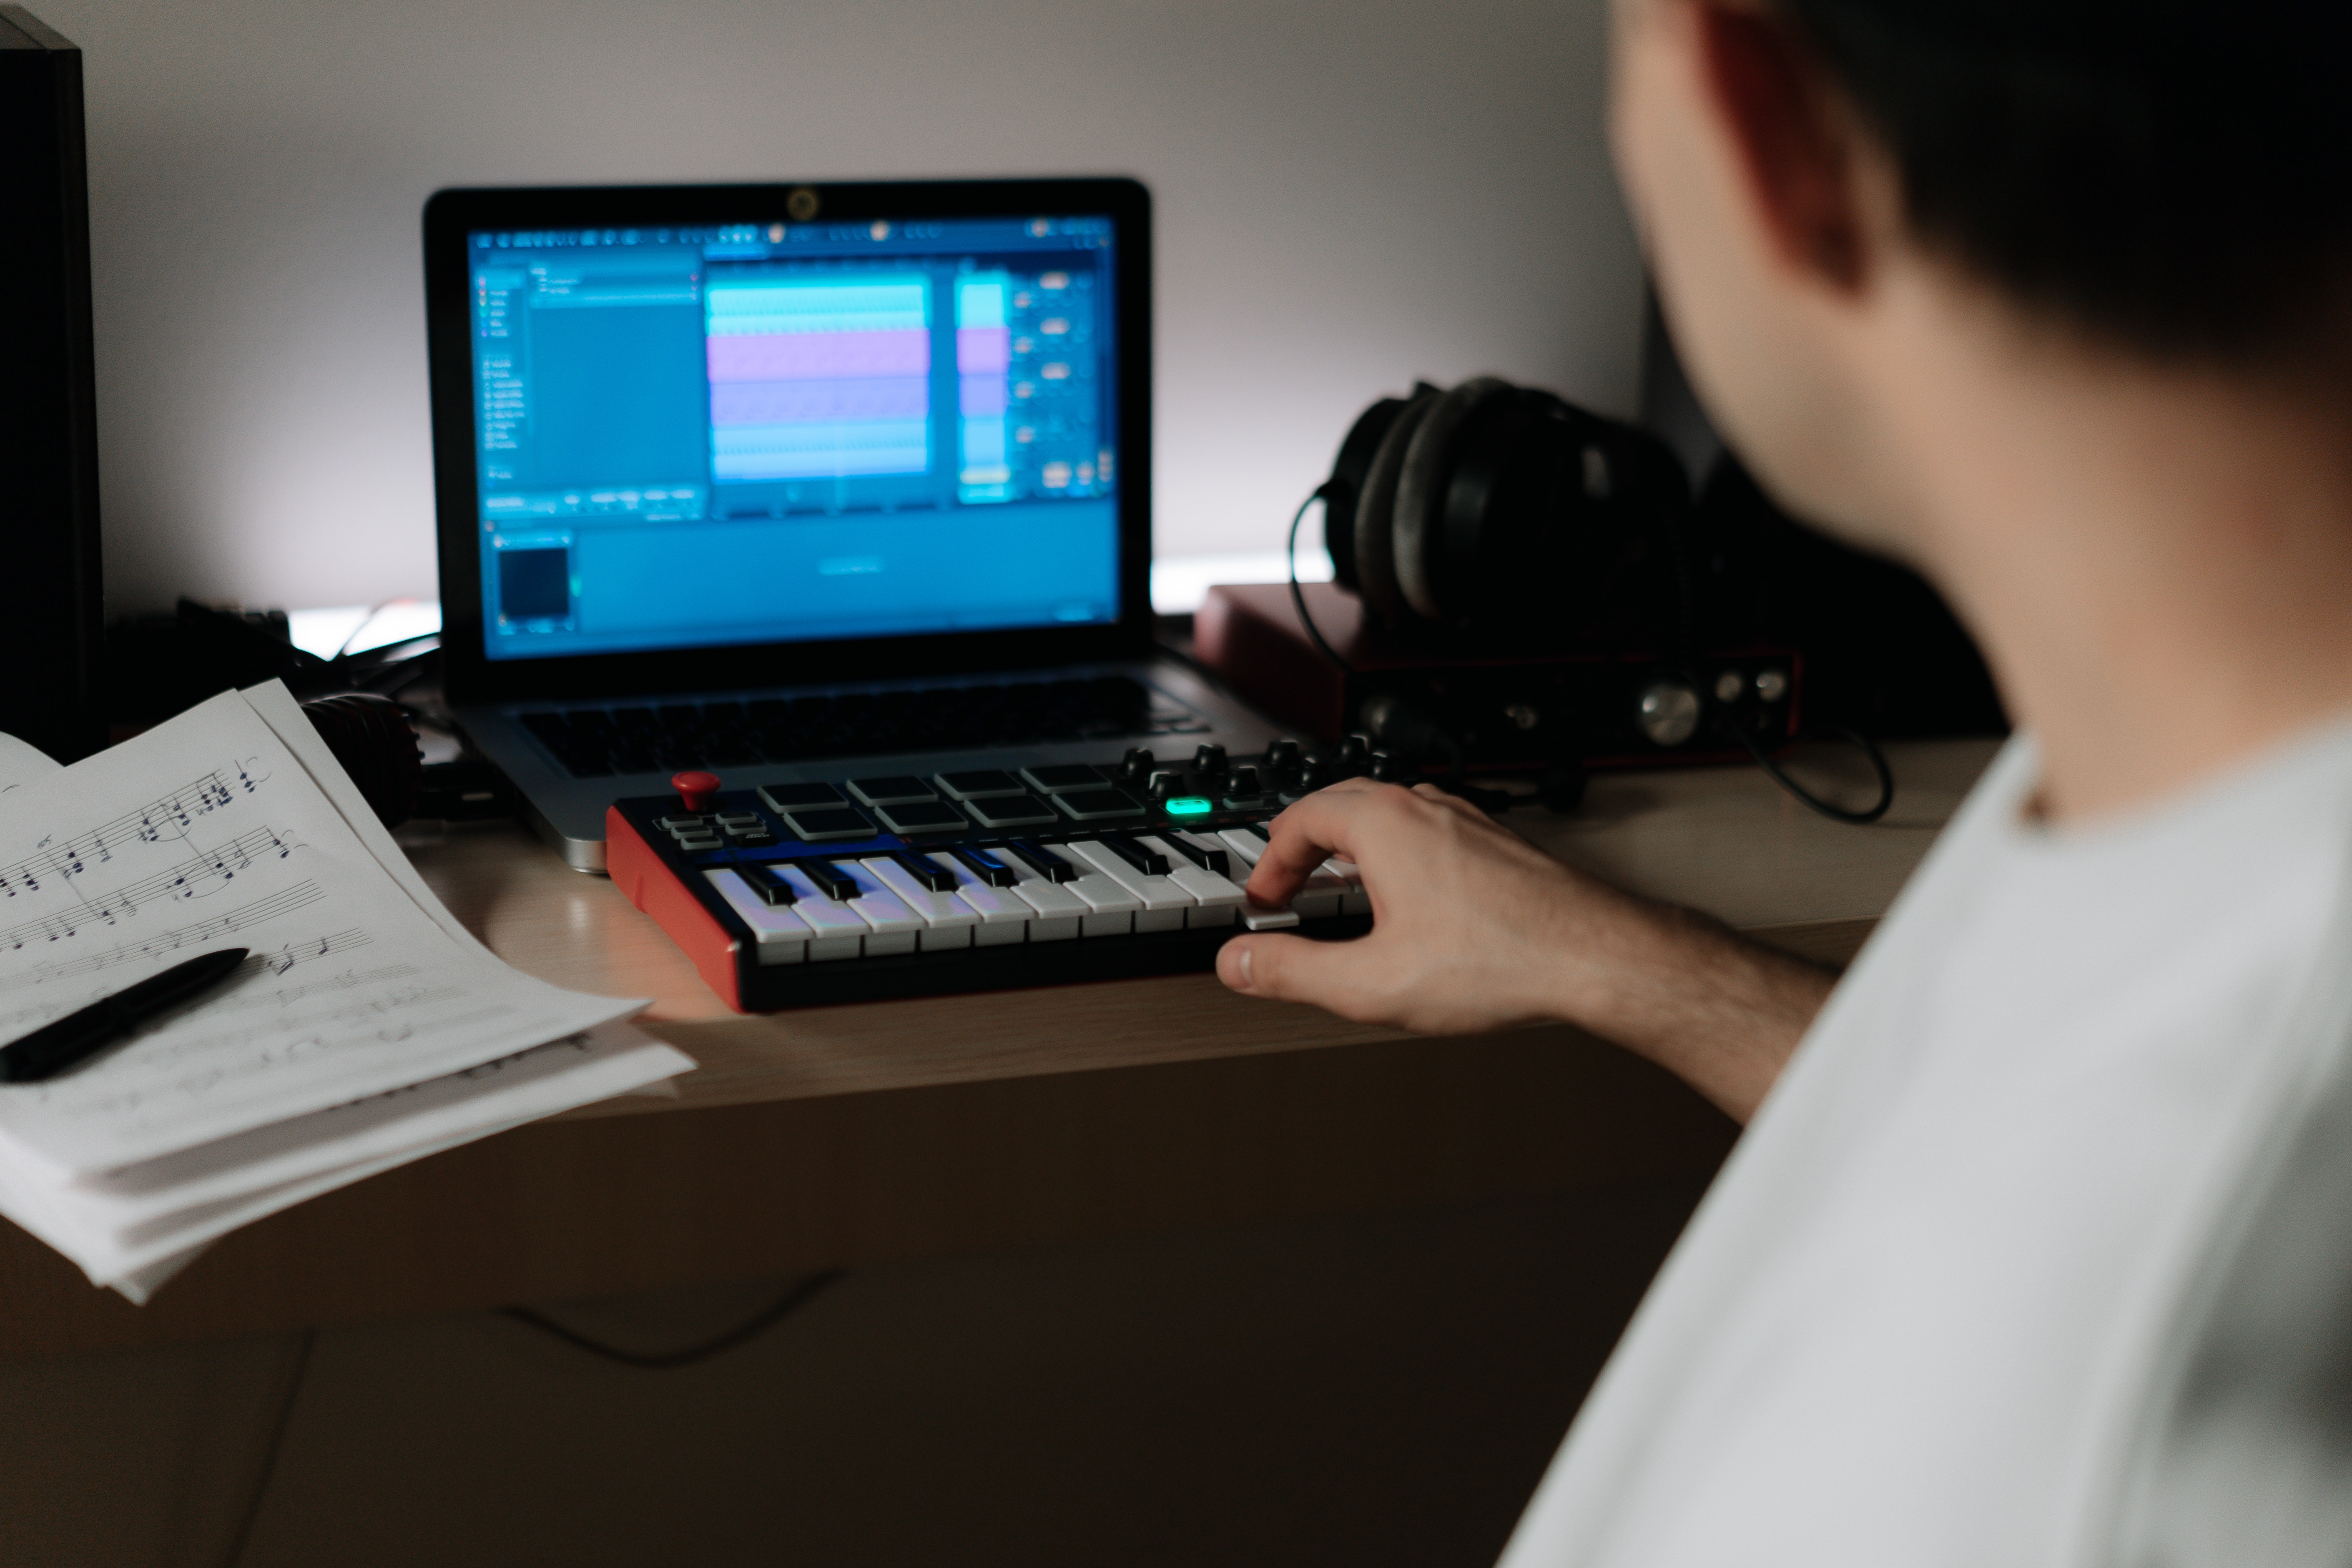 Person producing a song with a midi keyboard, a laptop, and a music sheet nearby